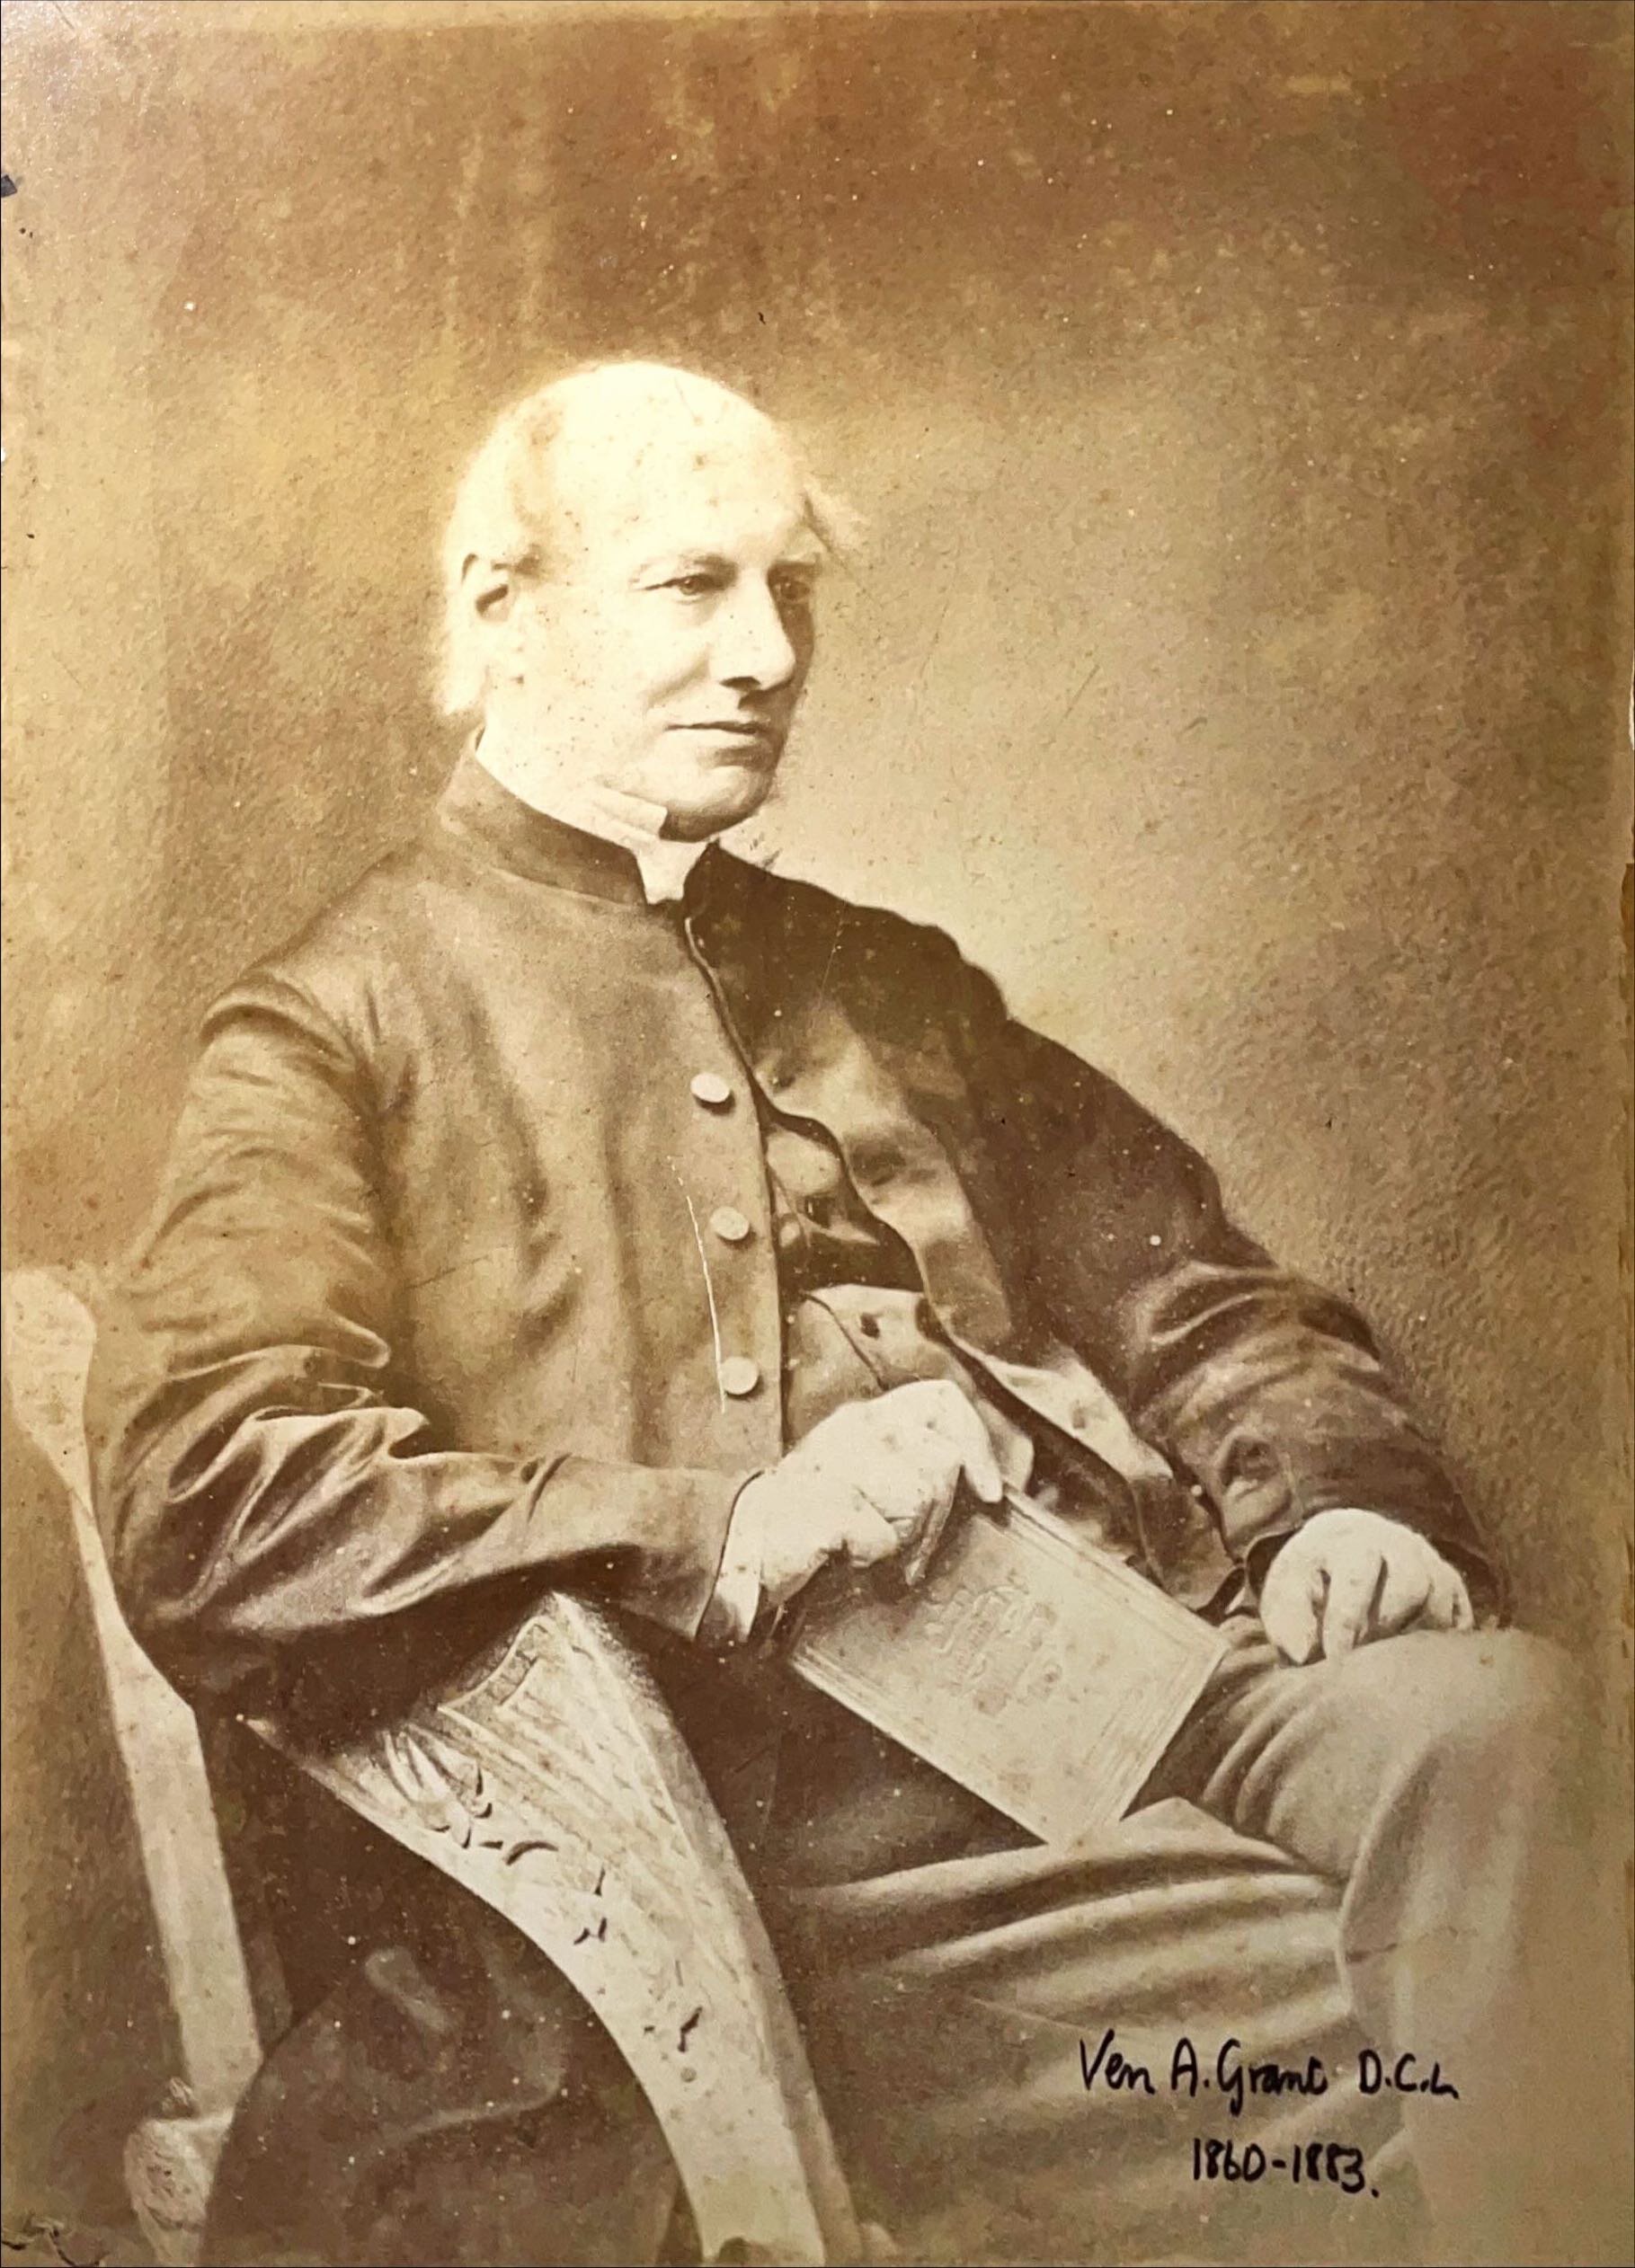 The Venerable A. Grant, Honorary Canon(?), 1860-1883